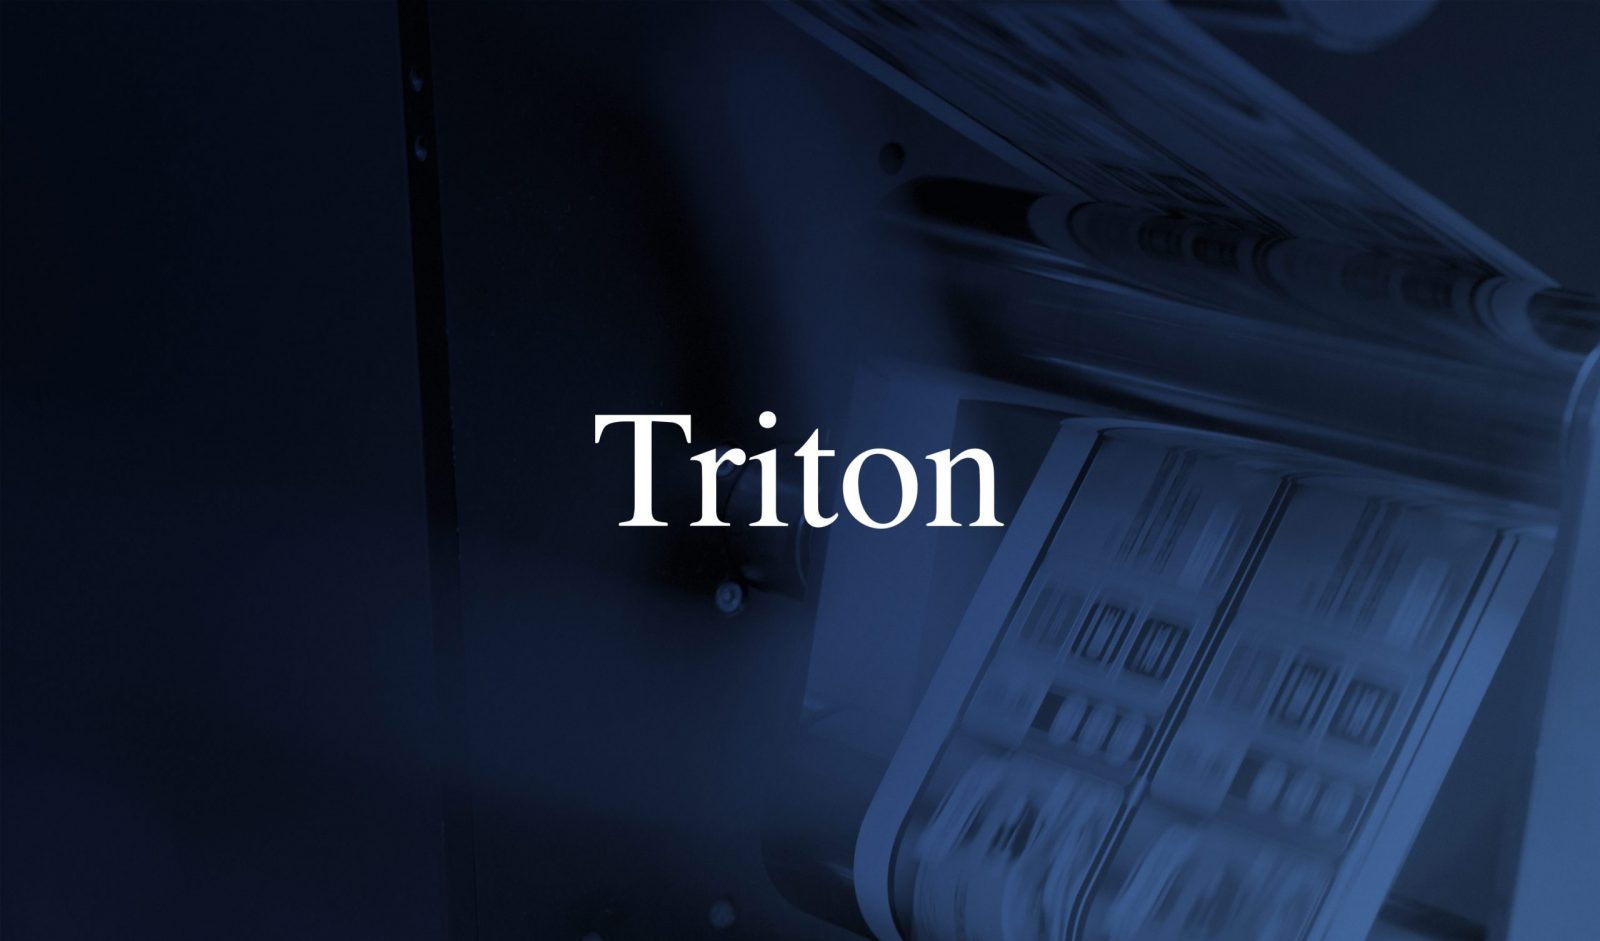 Triton invests in All4Labels together with current Management